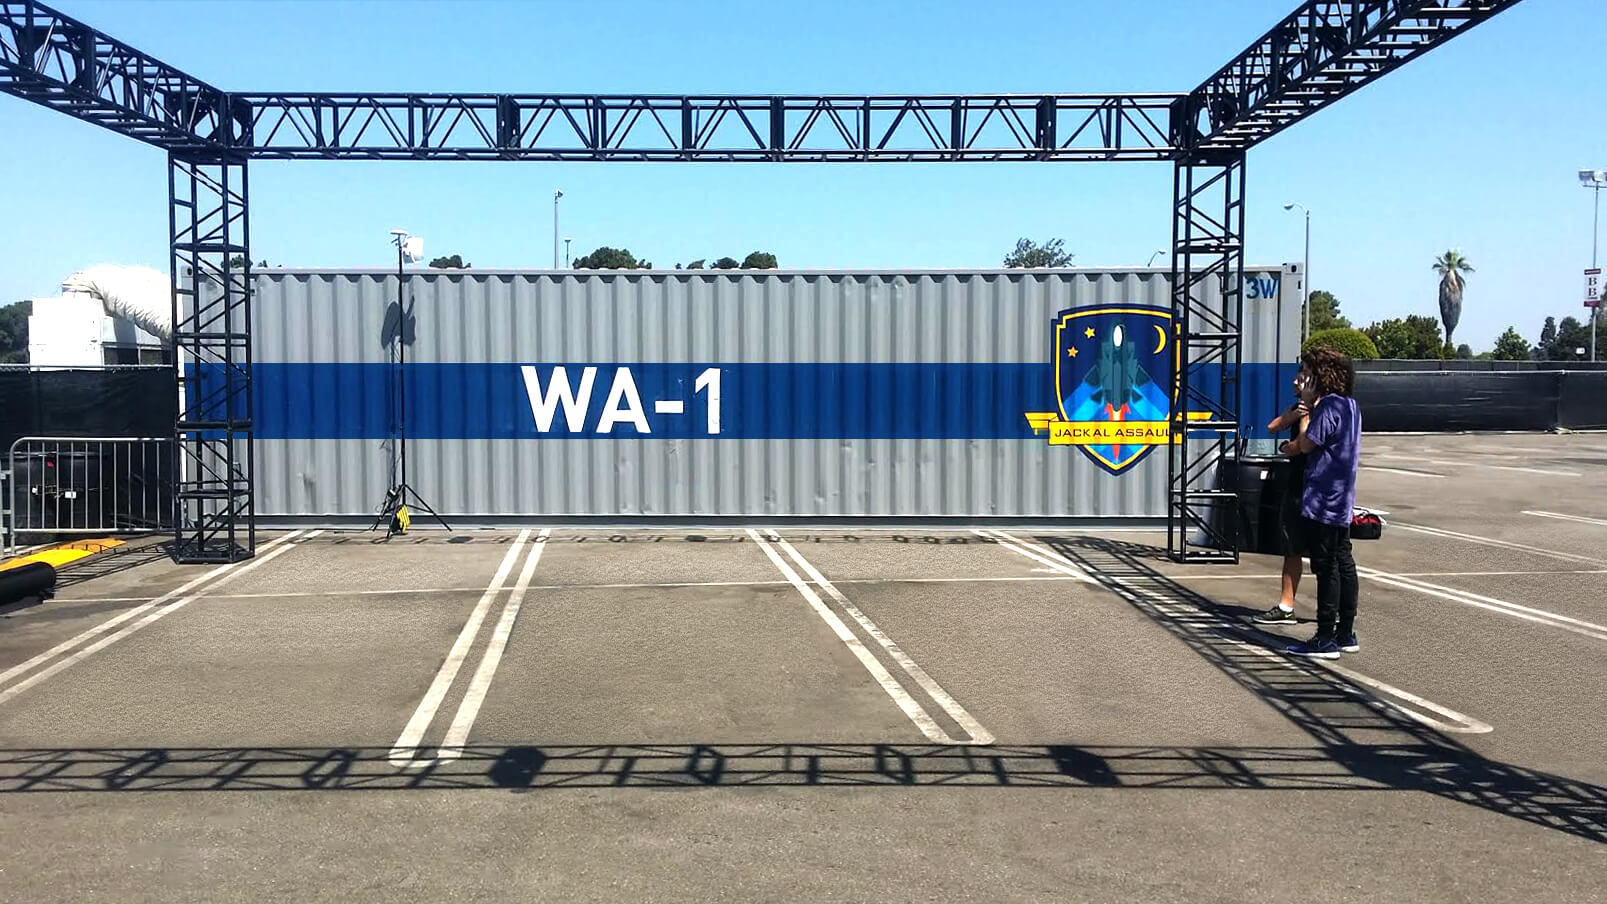 A Vinyl Graphic Install On Containers That Housed 3D Pilot Simulators At The CALL OF DUTY XP